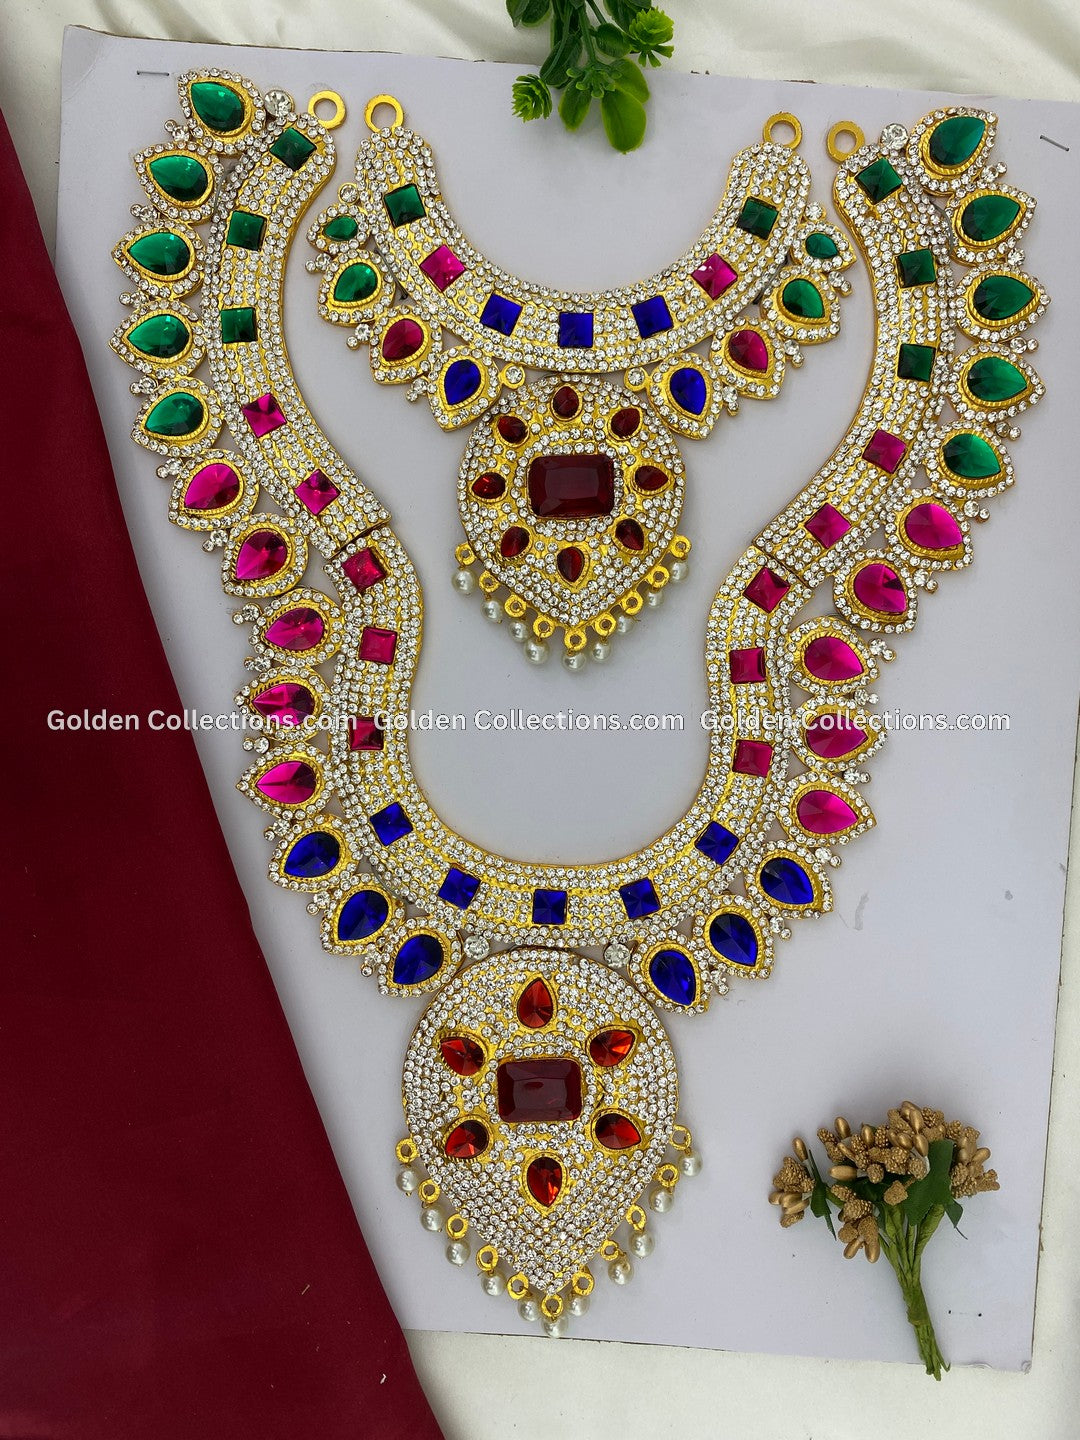 Enchanting Selection - Jewellery Set for Goddess - GoldenCollections